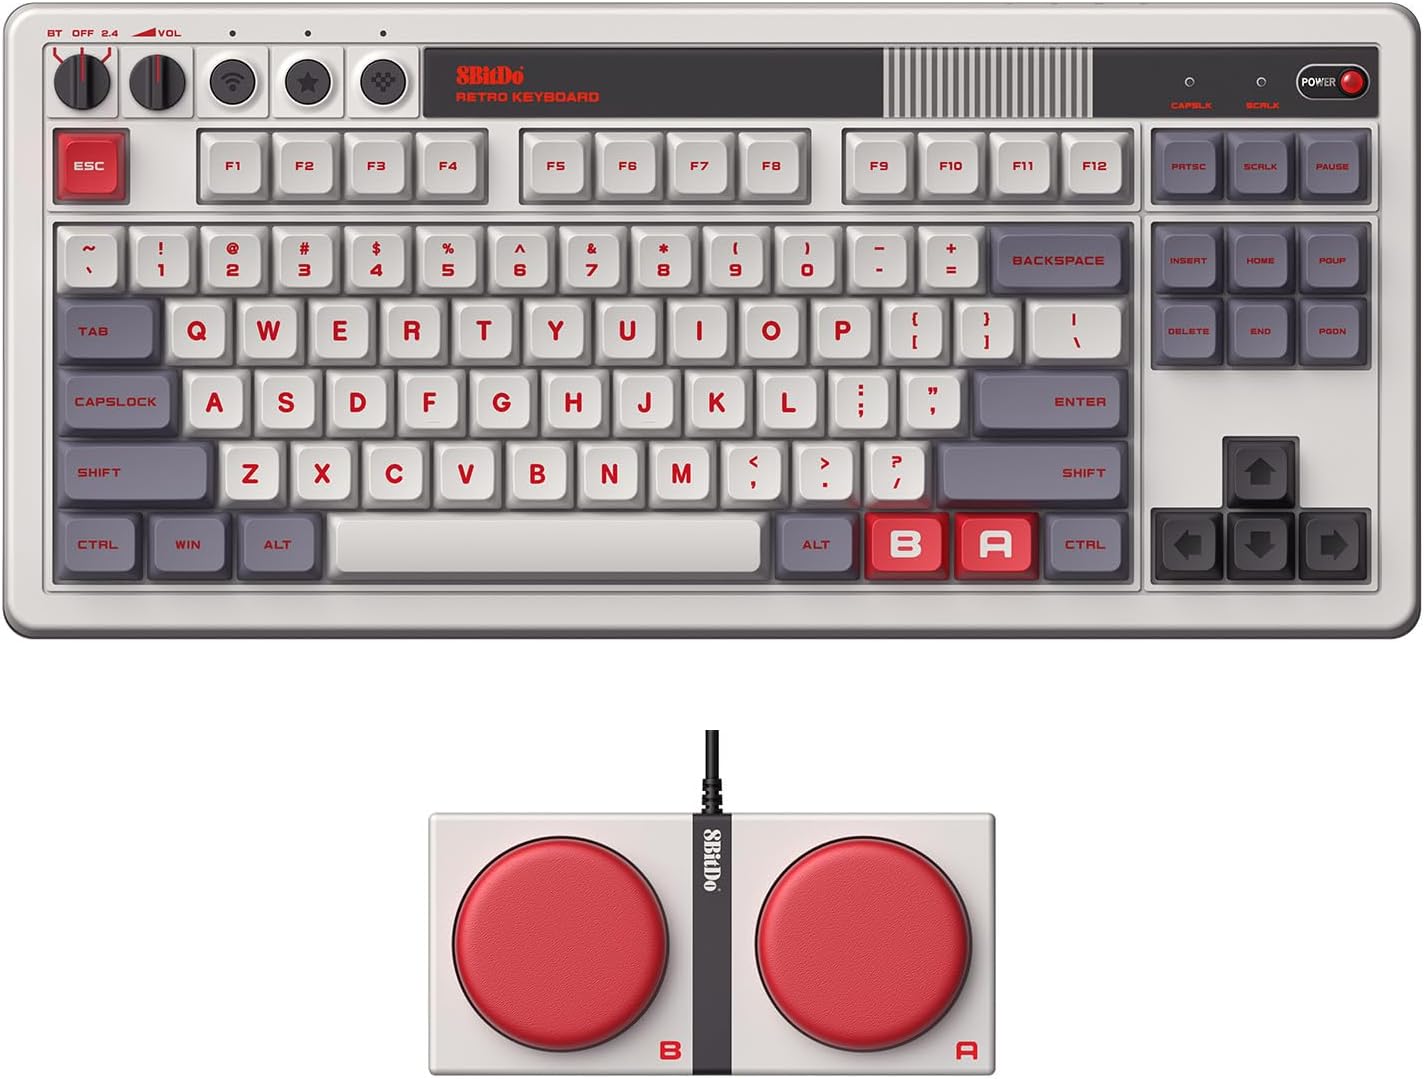 Rediscover the Magic of Retro Gaming with the 8-Bitdo Retro Mechanical Keyboard!